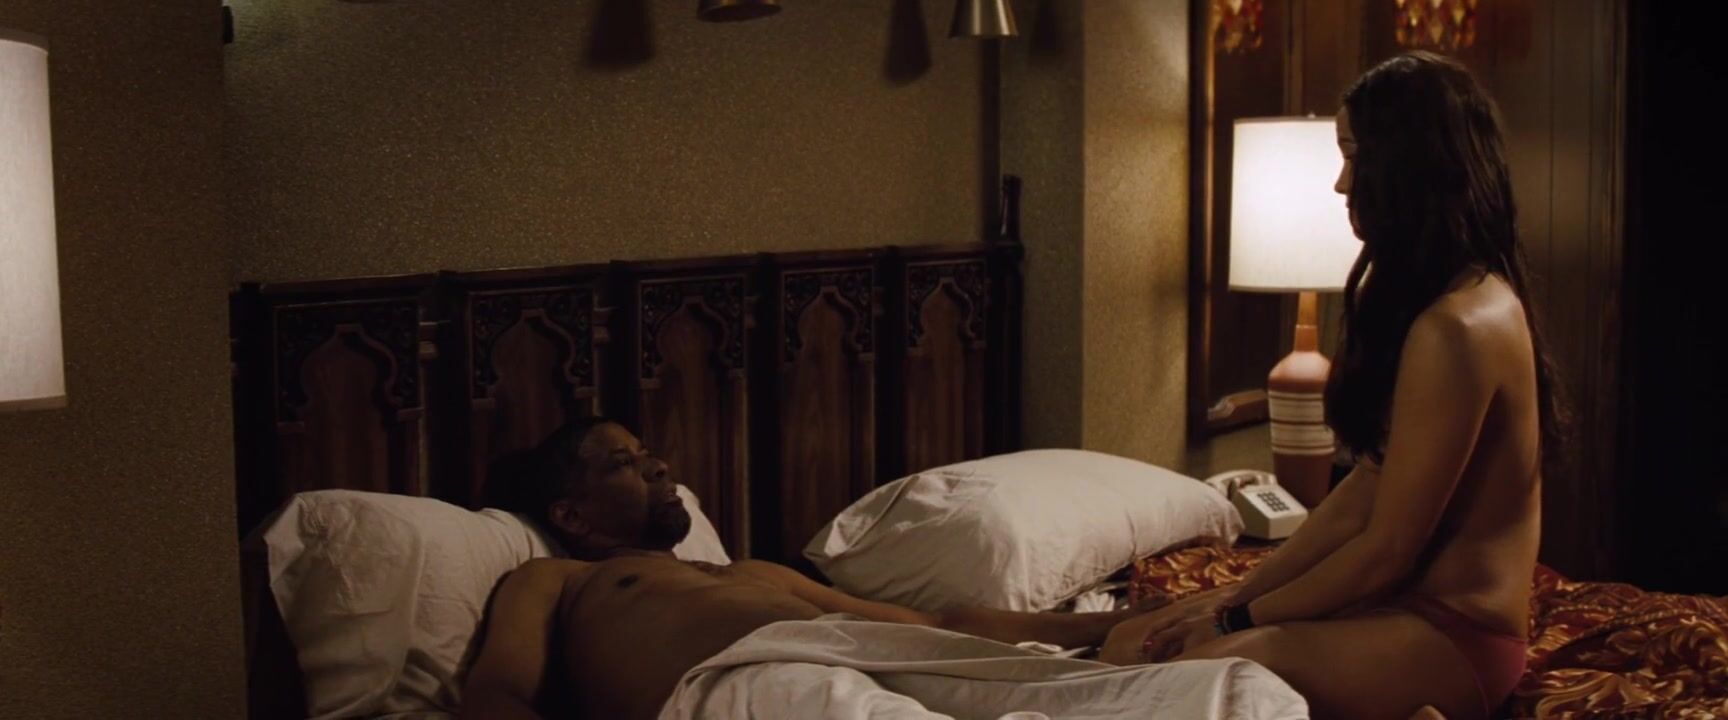 Handsome Paula Patton manages to excite black man during the naked moment from 2 Guns movie Caliente - 2